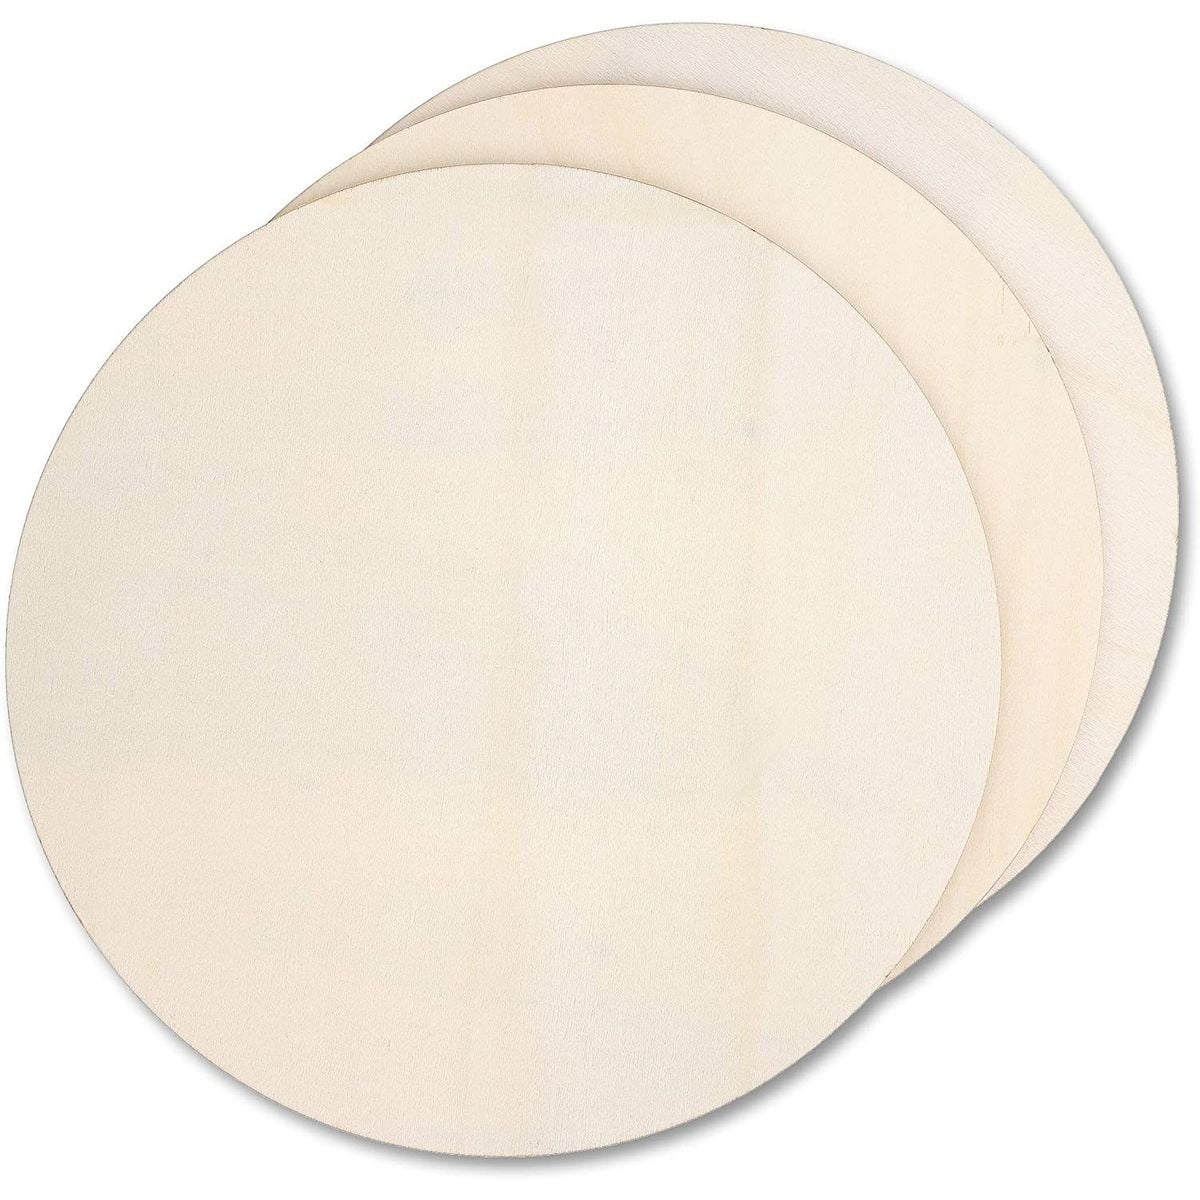 MDF wooden Circle shapes 5" Diameter pack of 3 